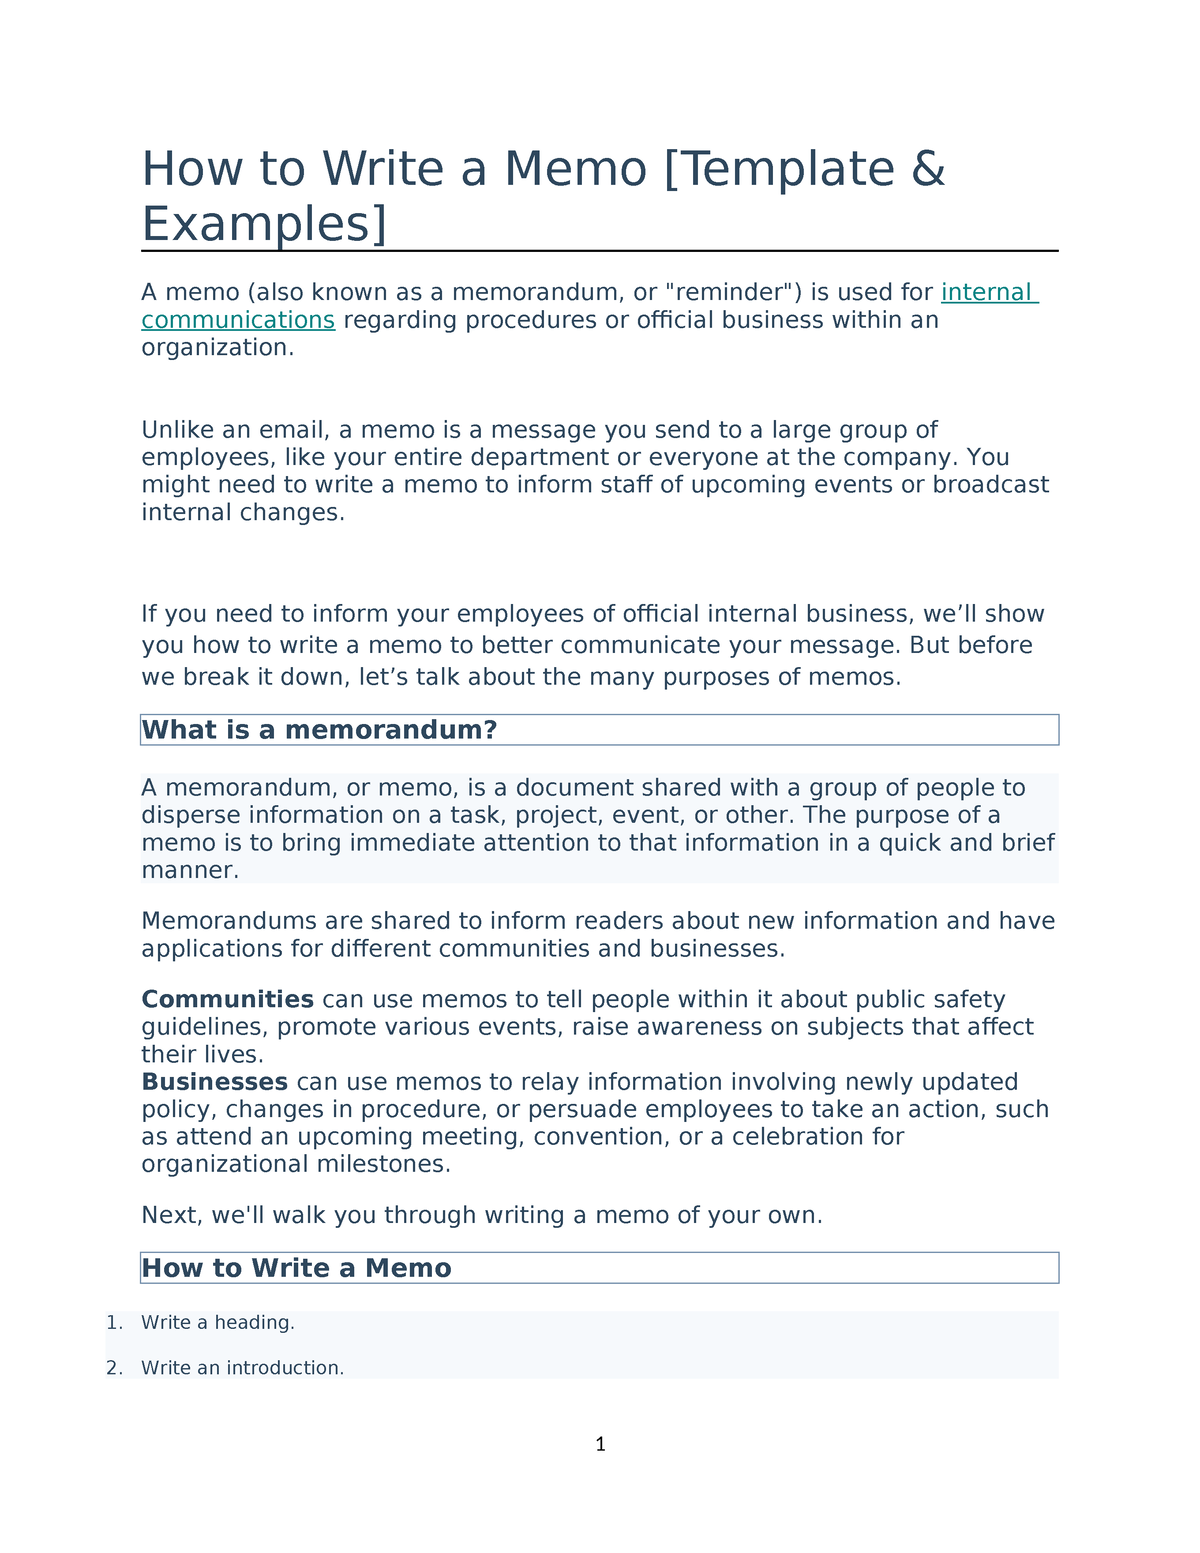 How to Write a Memo [Template & Examples]